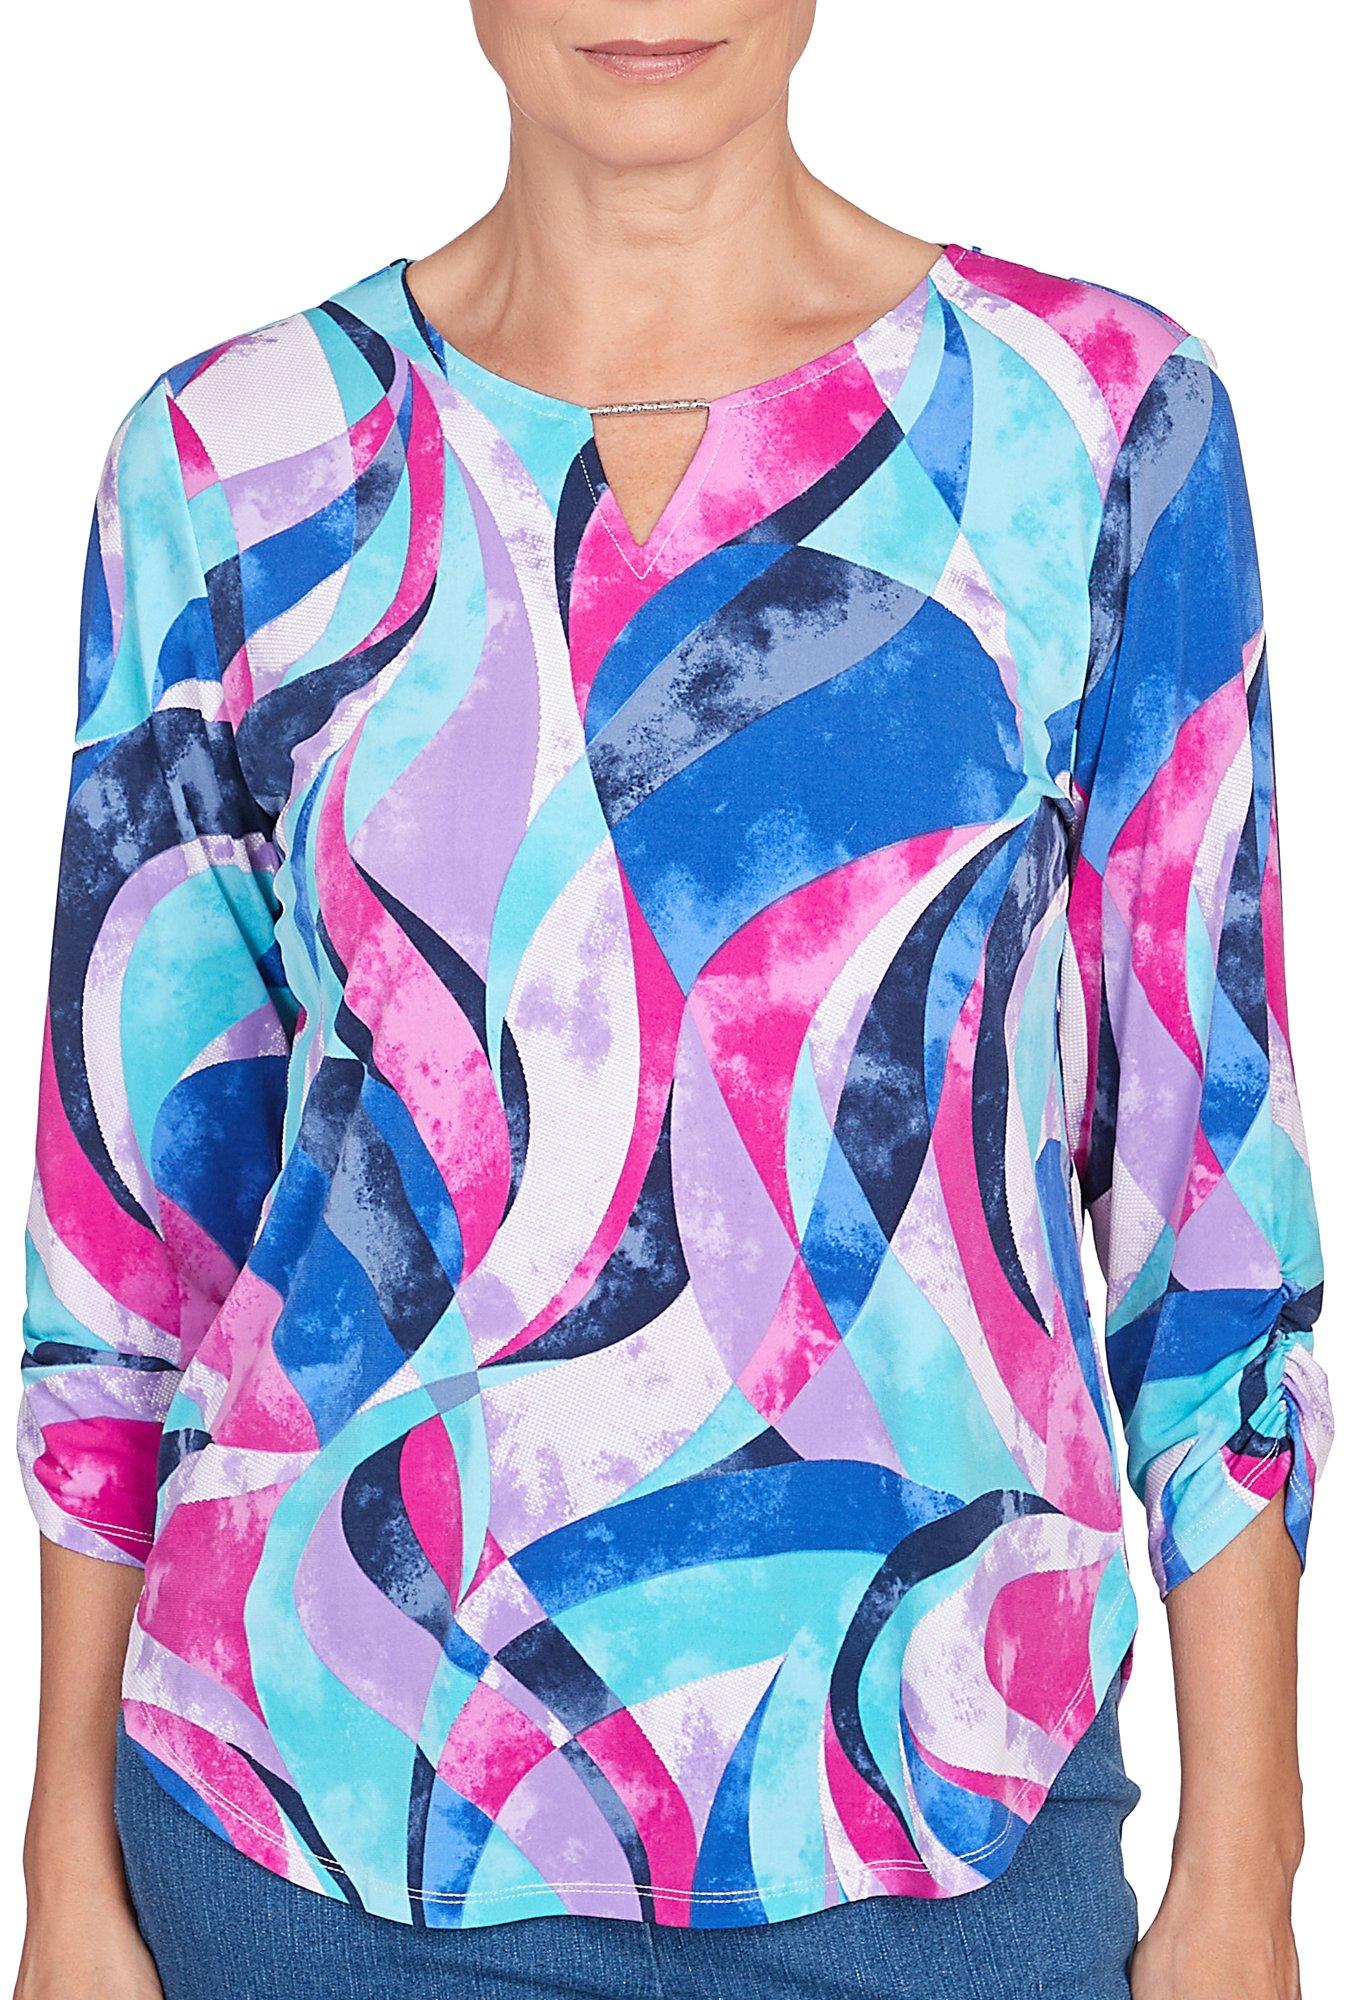 Alfred Dunner Petite Puff Print Stained Glass Swirl Top